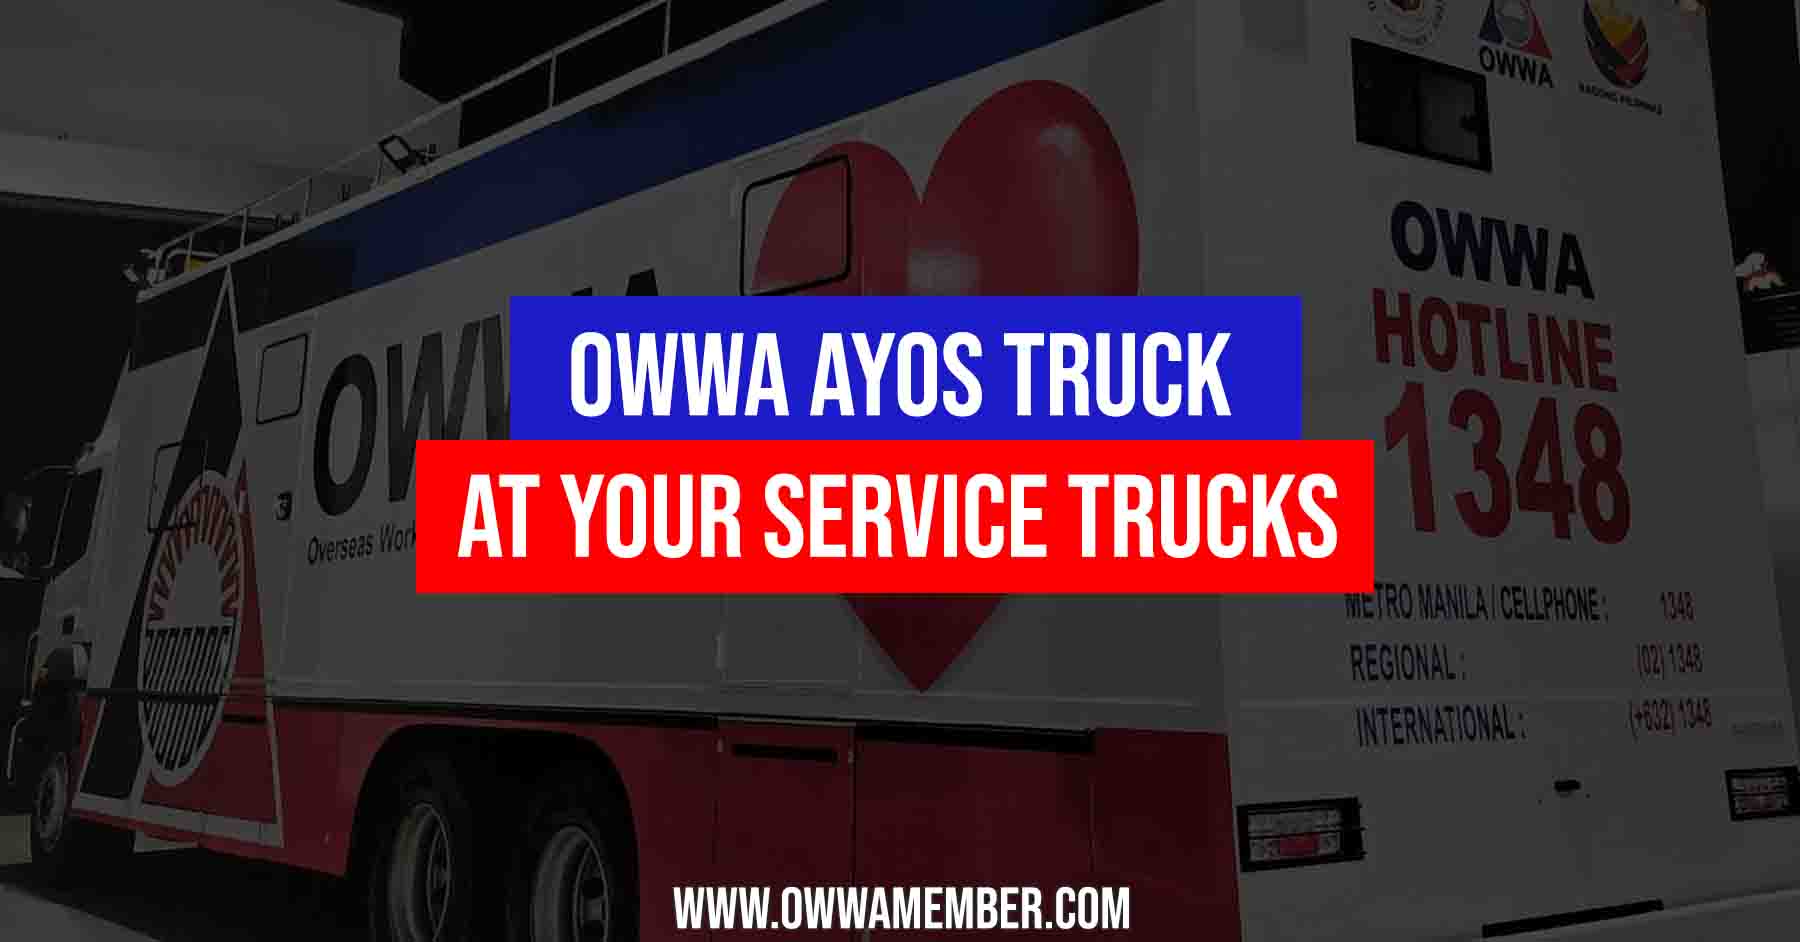 owwa ayos truck launched at your service